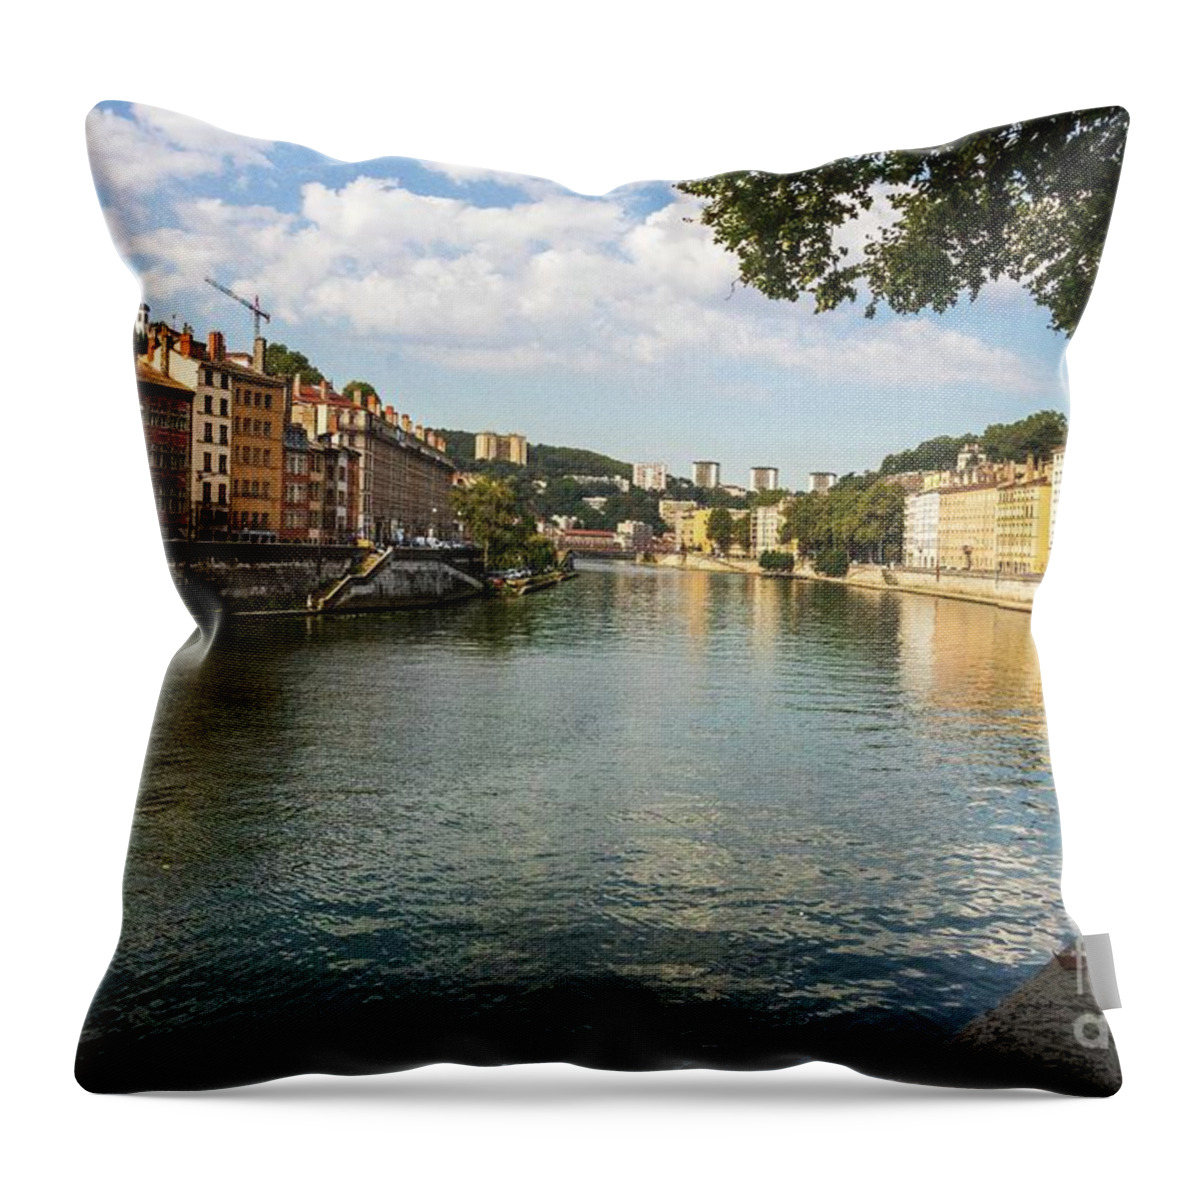 Architecture Throw Pillow featuring the photograph Saone River View by Thomas Marchessault